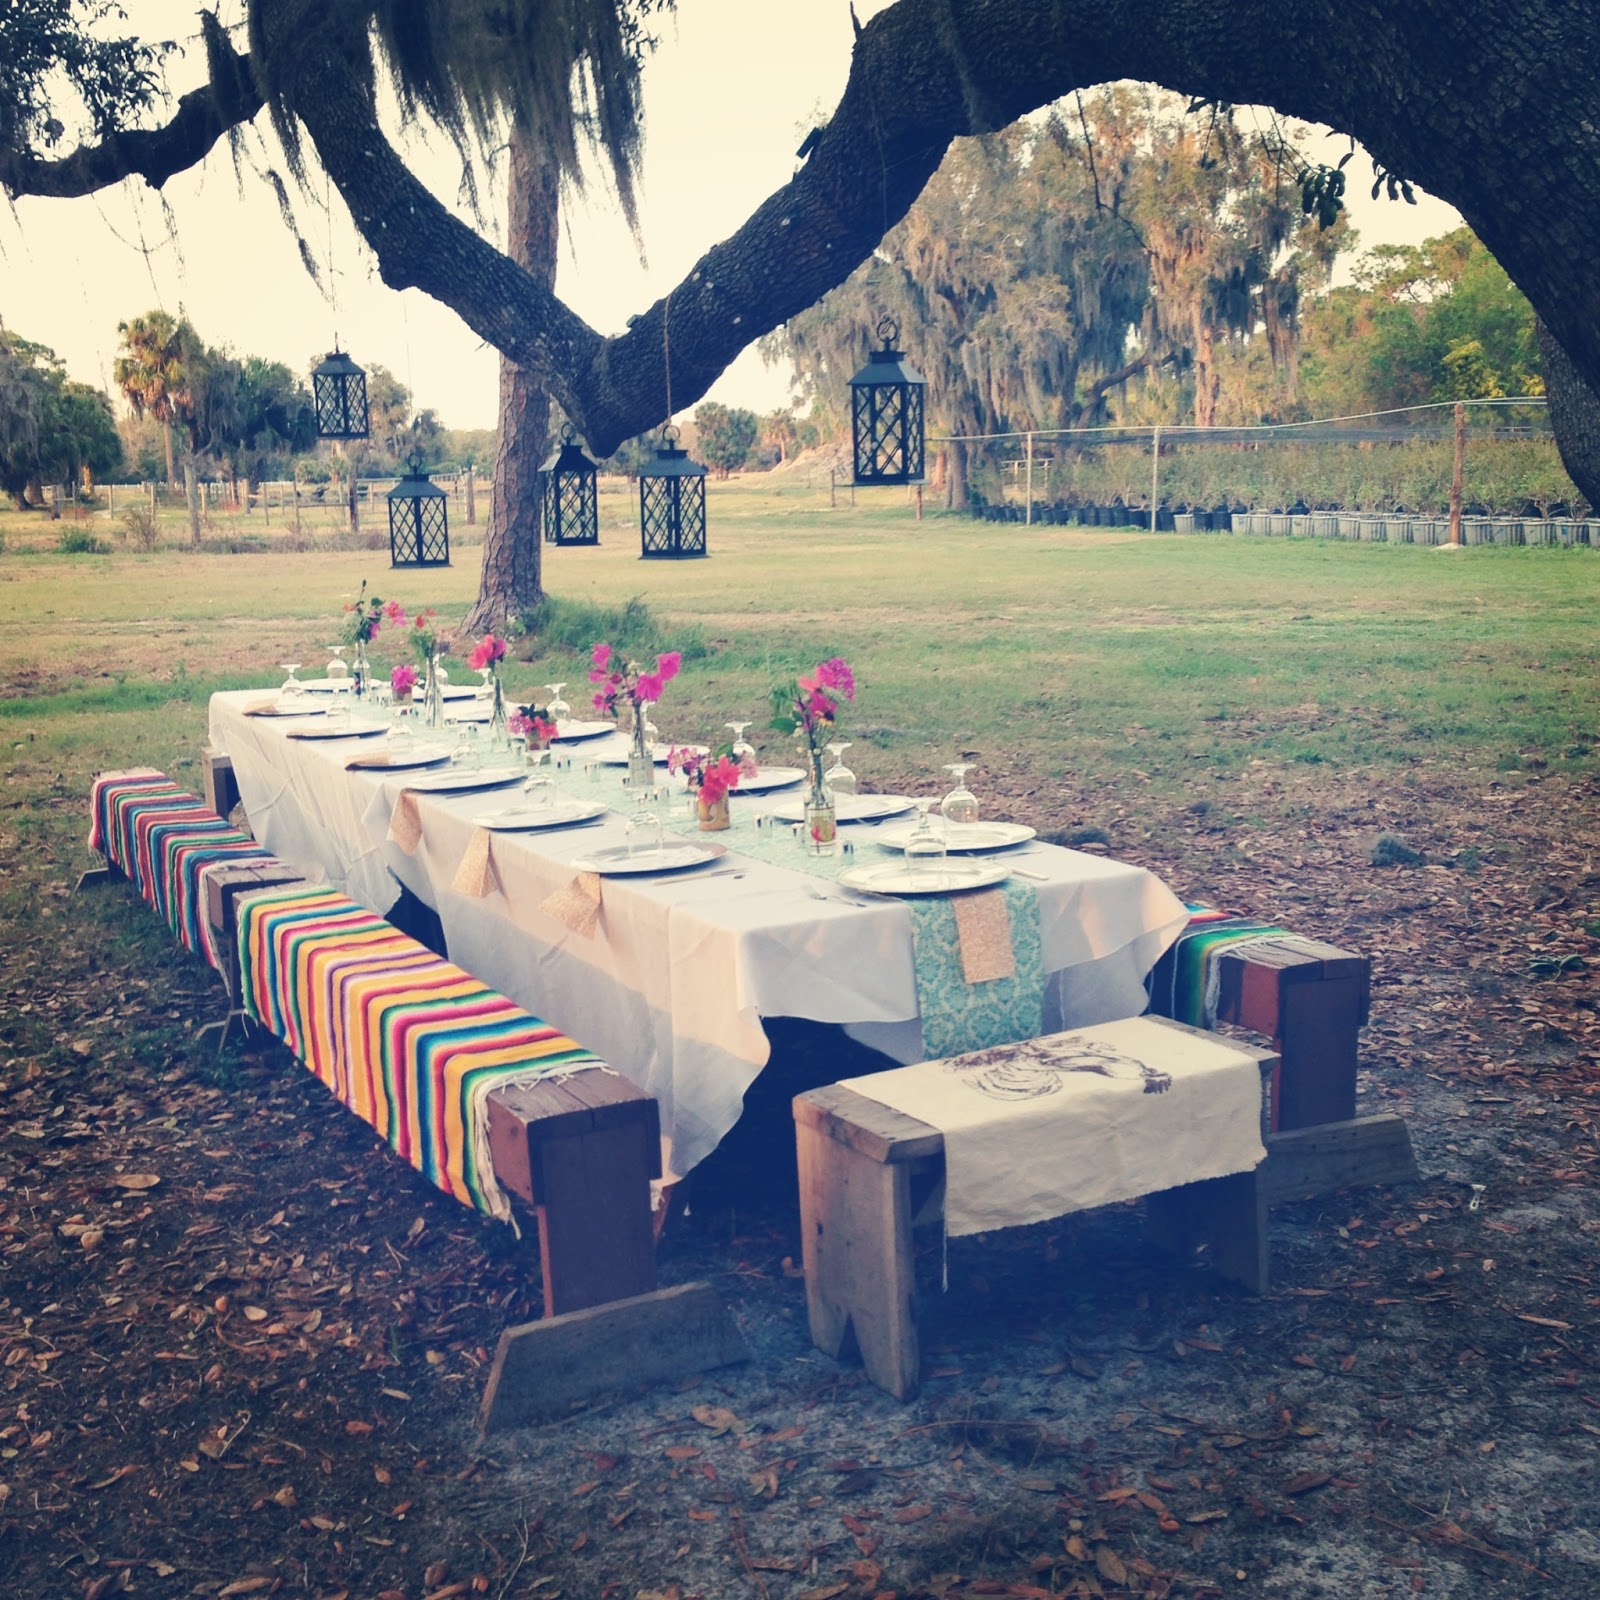 pink o'clock: Farm to table dinners at King Family Farm.